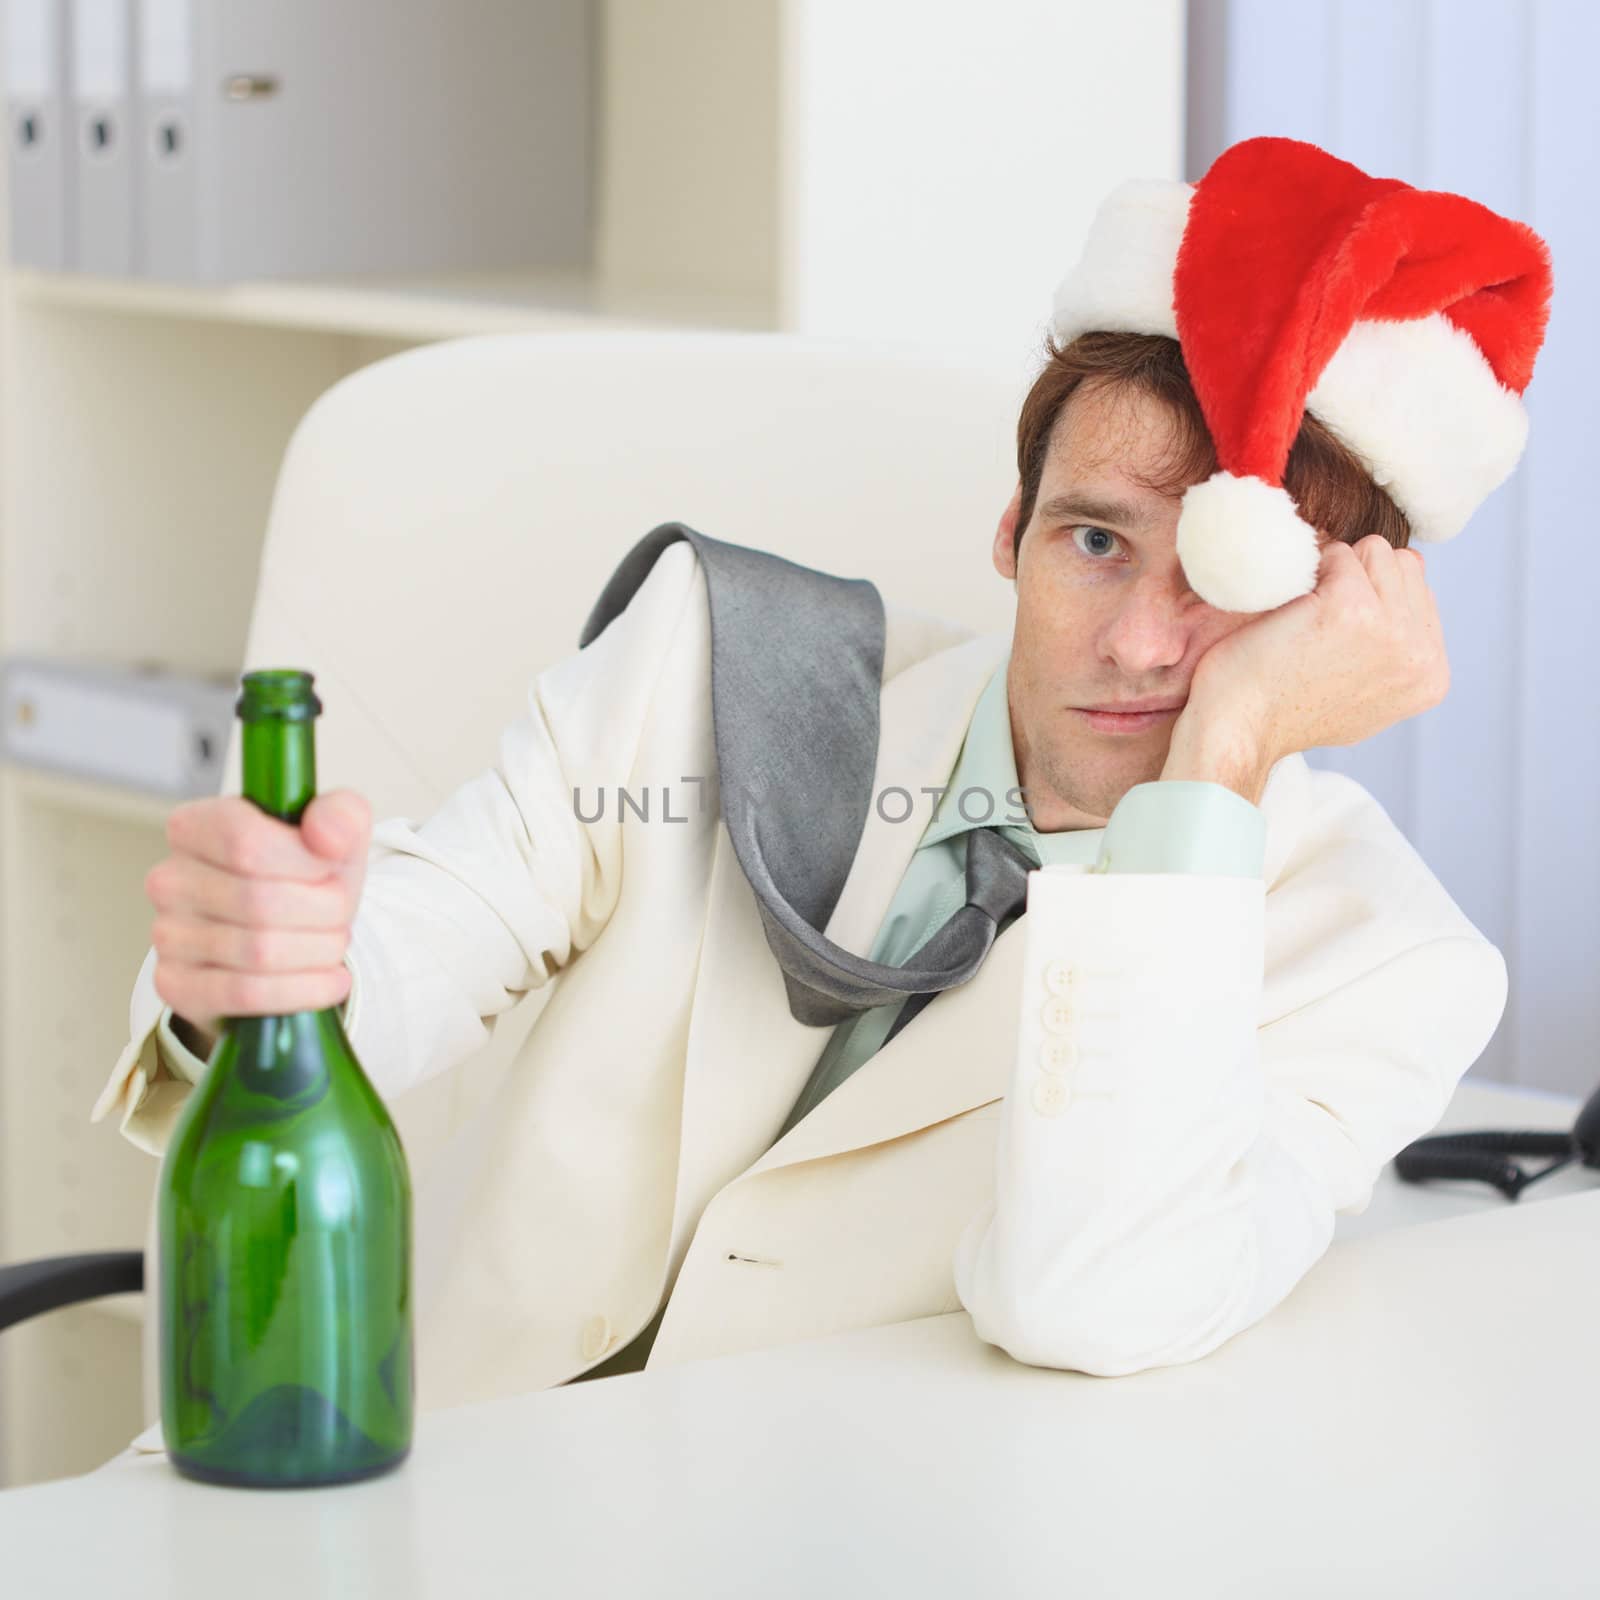 Young drunkard celebrates Christmas with wine bottle by pzaxe